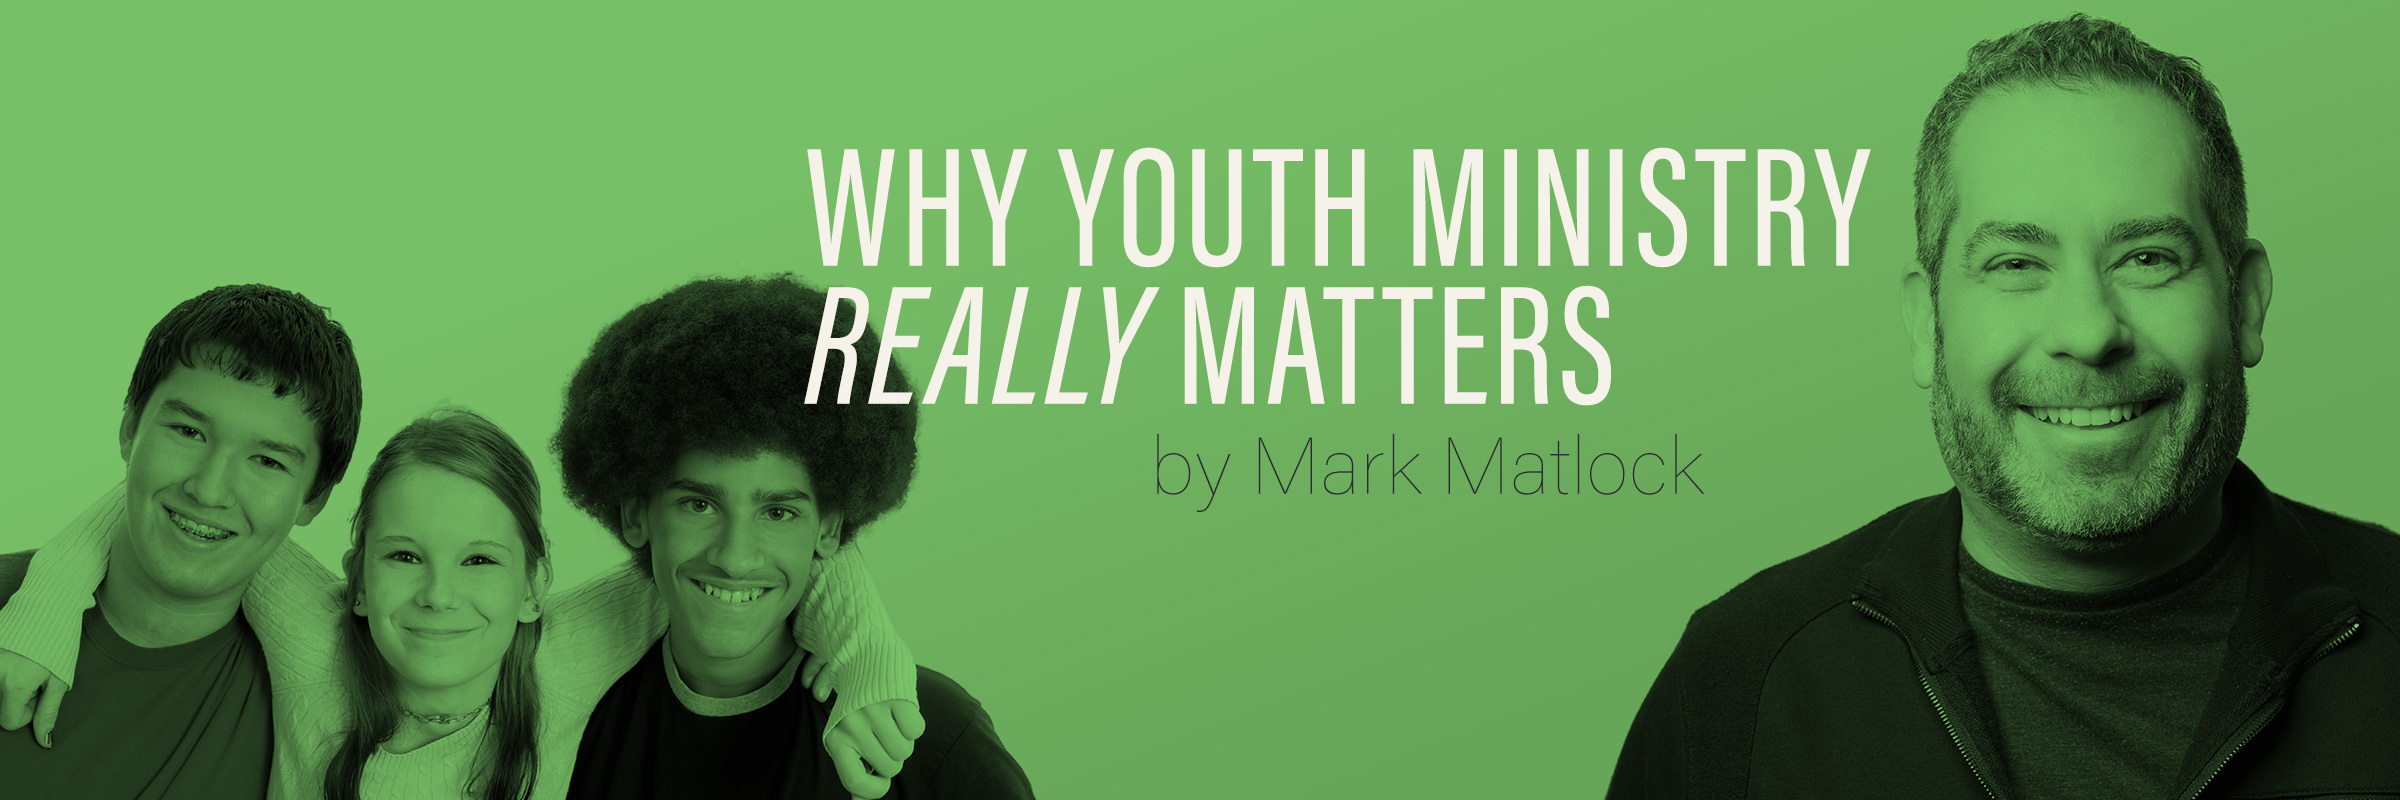 Why Youth Ministry Really Matters